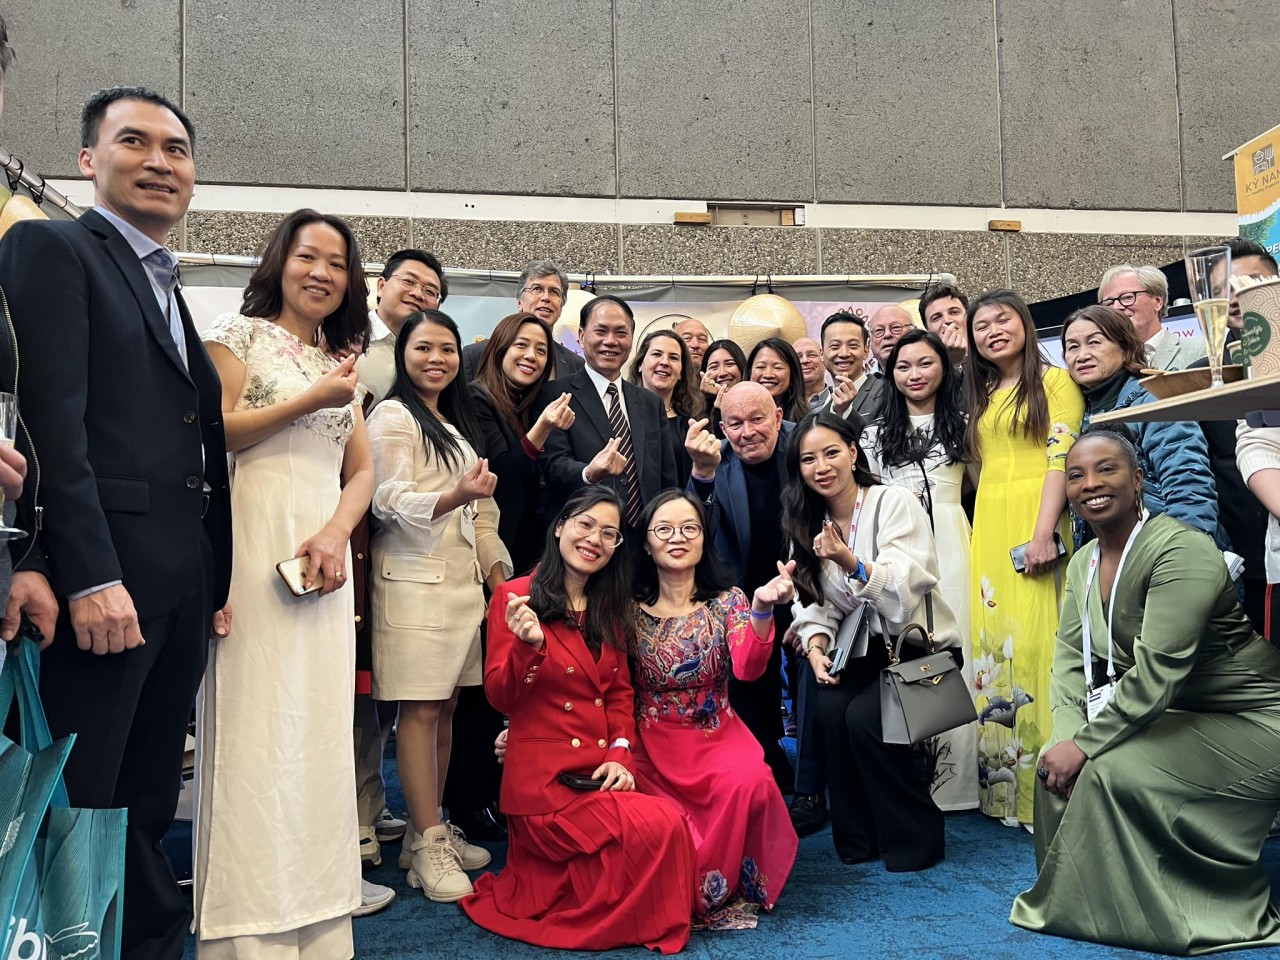 Ambassador Pham Viet Anh attended the opening ceremony of Miss Linh booth at Horecava International Fair 2023 in Amsterdam, the Netherlands.